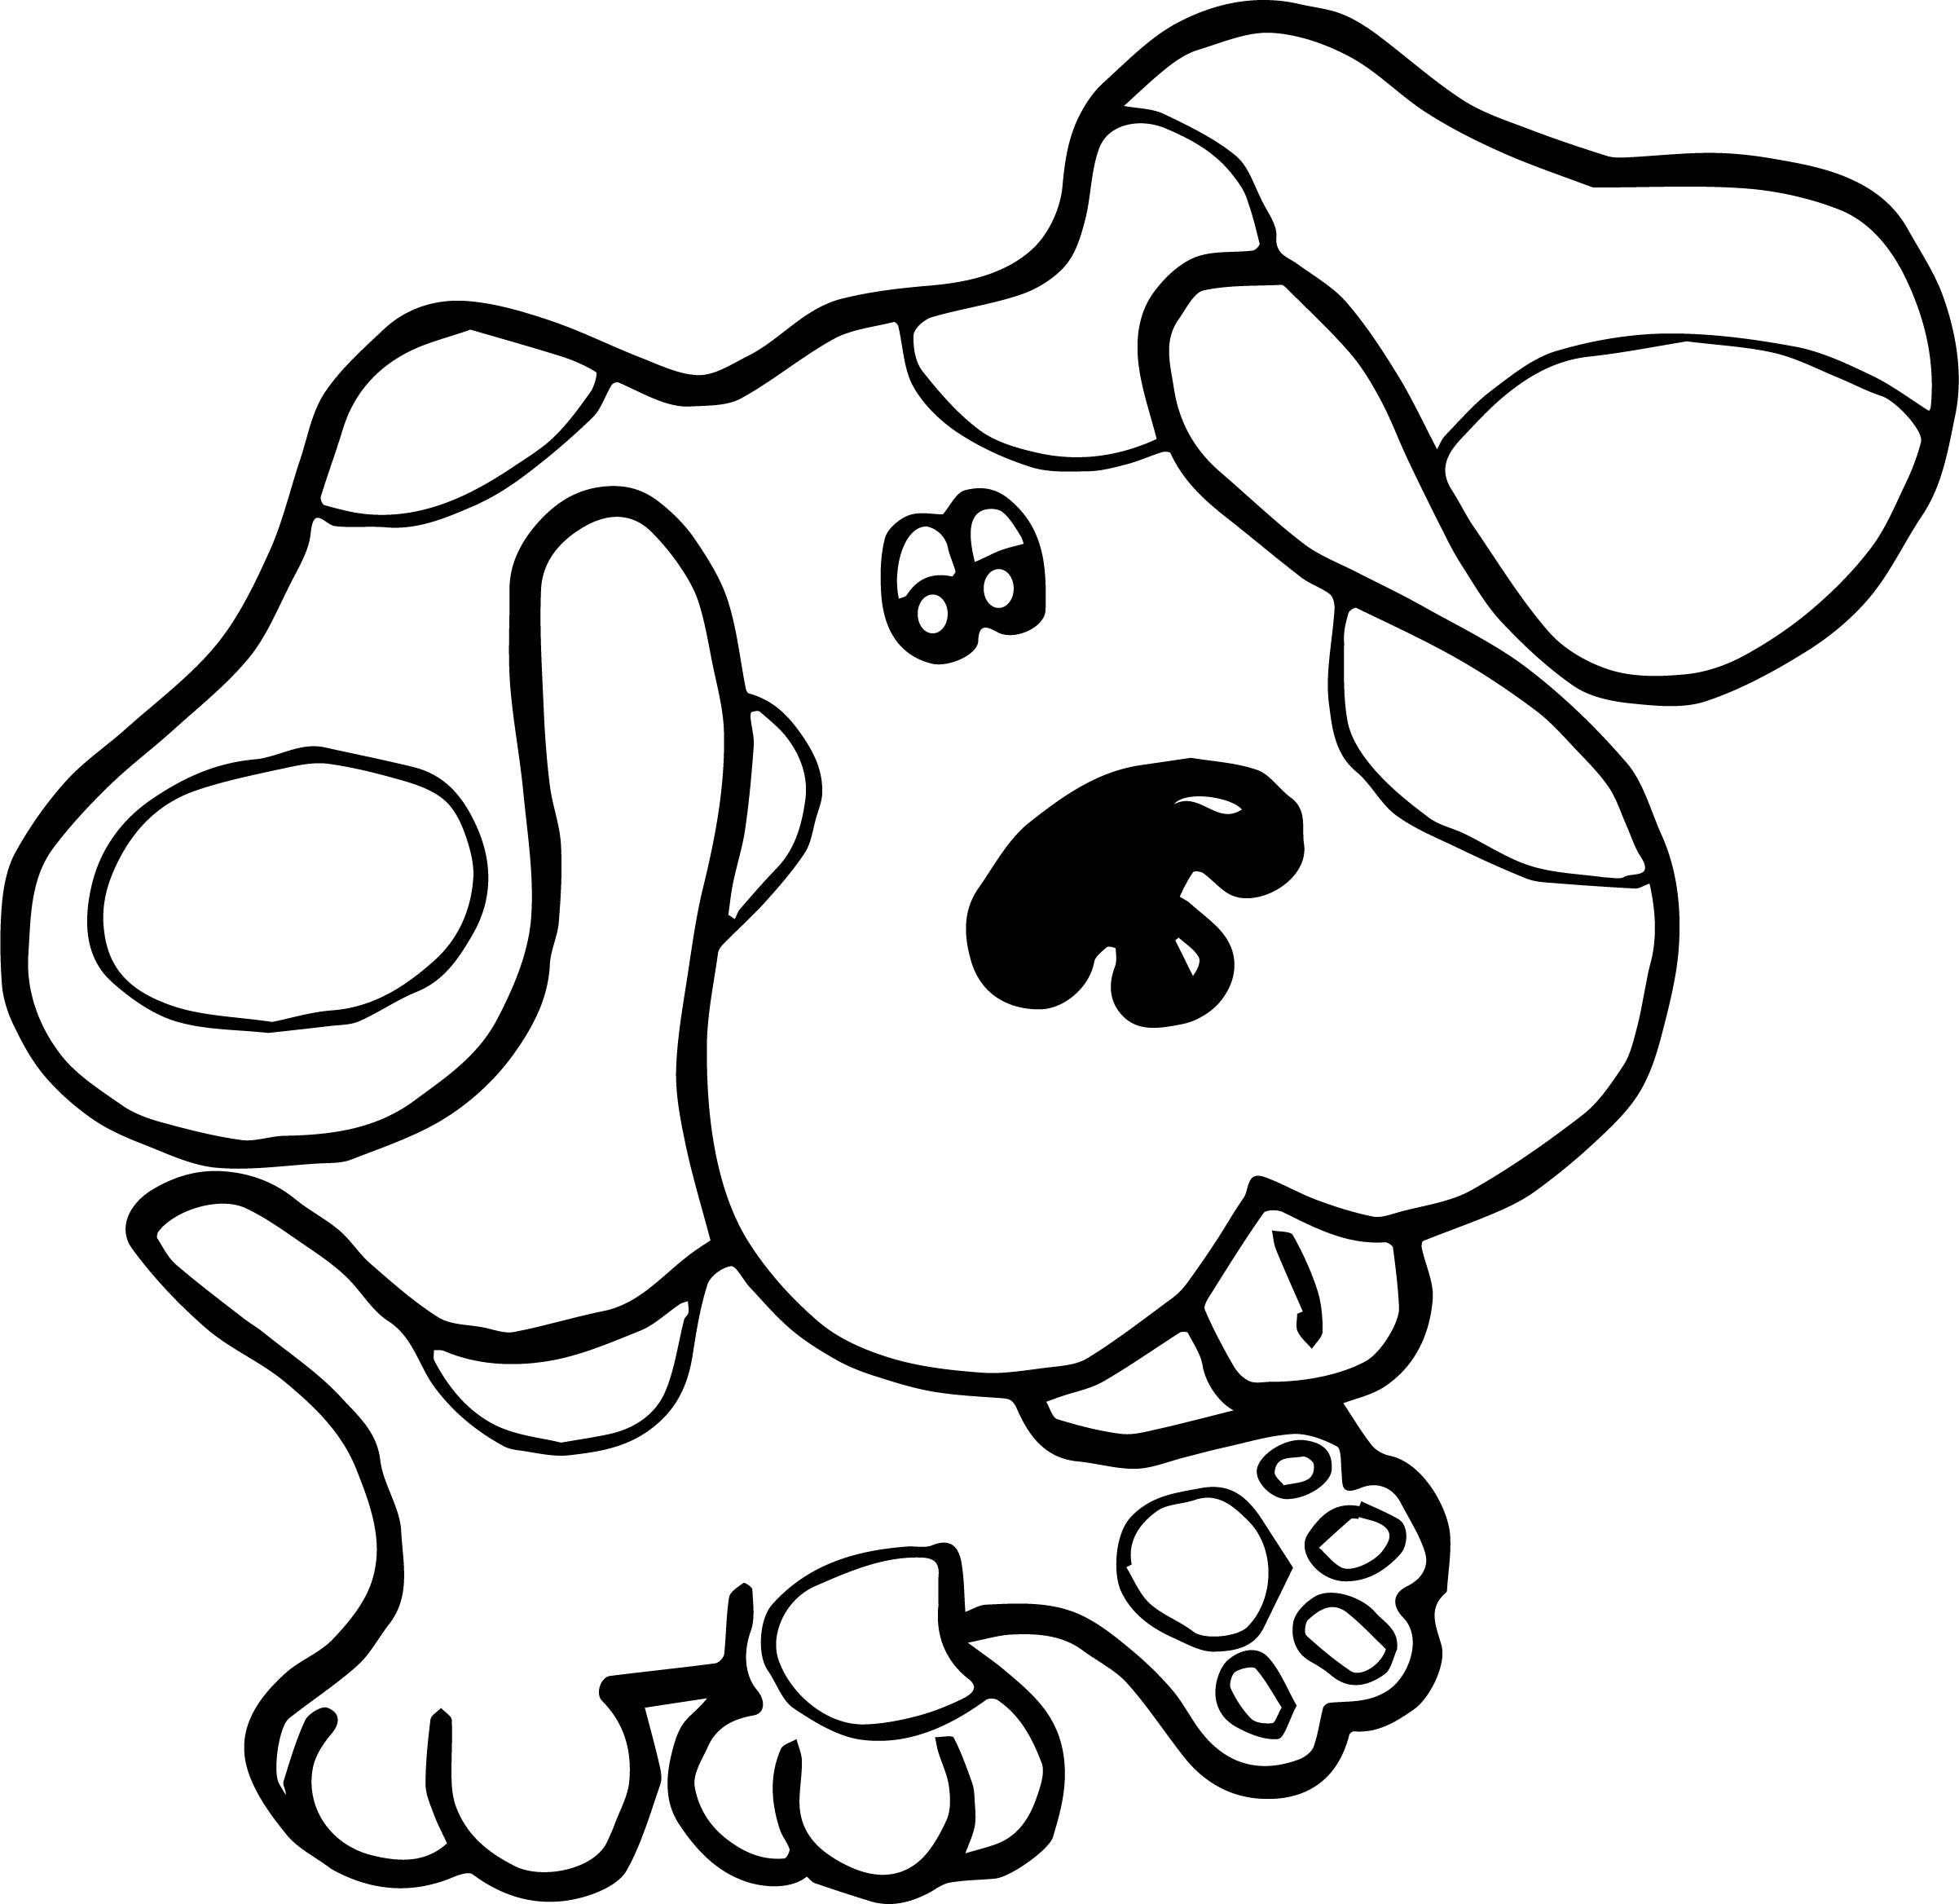 Printable Blues Clues Coloring Pages - Coloring Pages Of Blues Clues